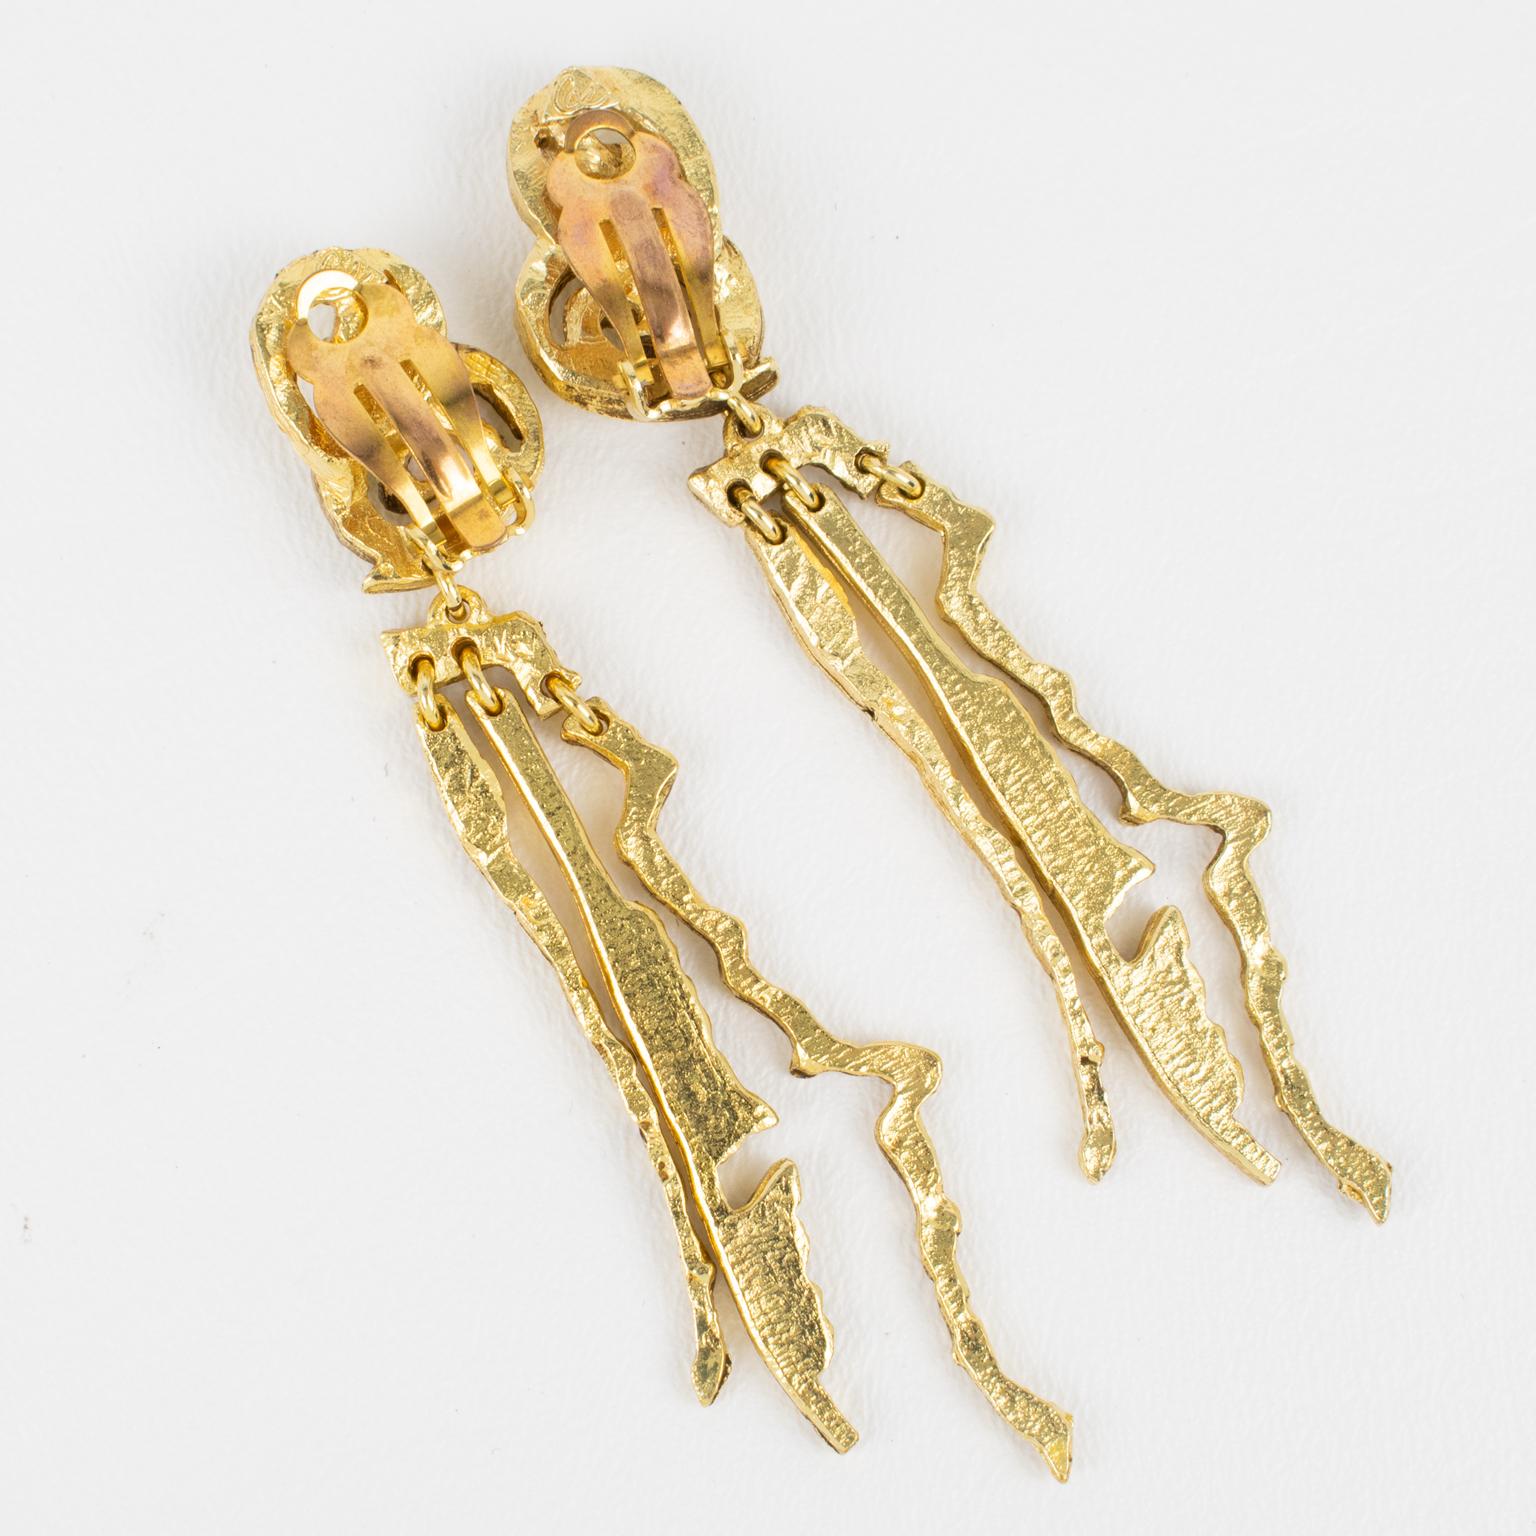 Christian Lacroix Brutalist Gilt Metal Jeweled Dangle Clip Earrings In Excellent Condition For Sale In Atlanta, GA